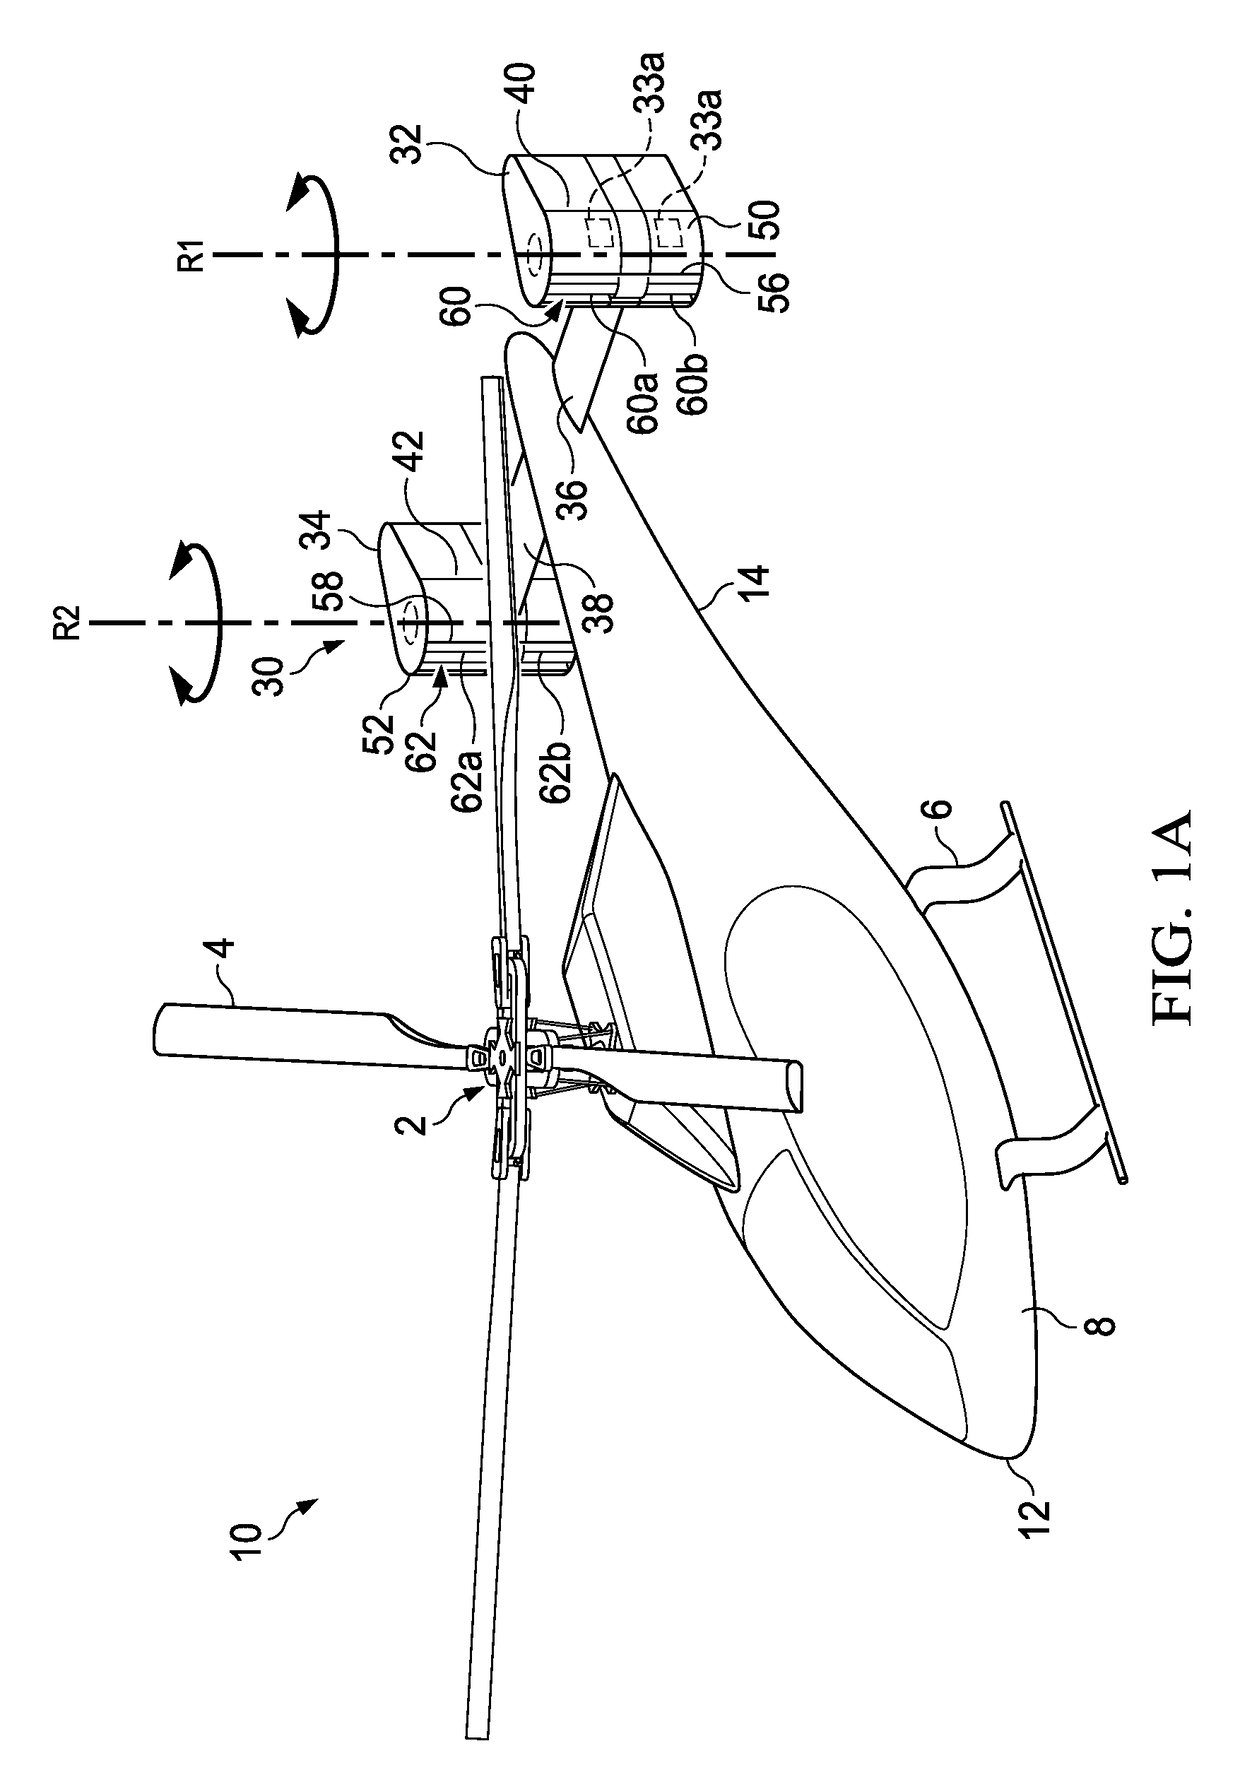 Aircraft tail with cross-flow fan systems